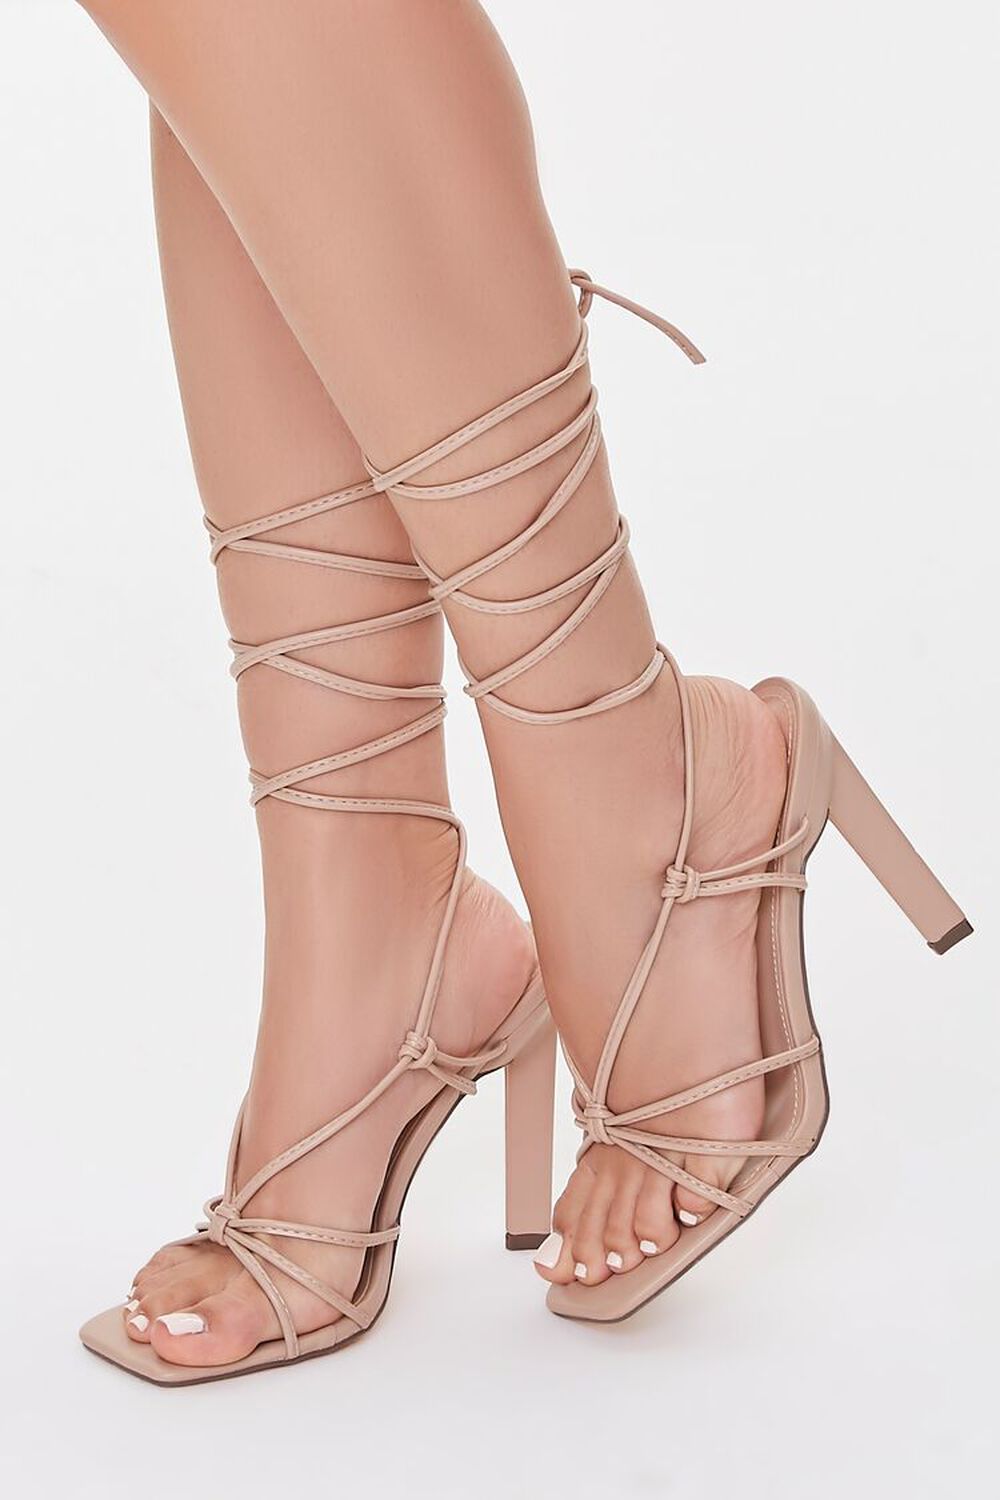 TAN Knotted Strappy Wraparound Heels, image 1